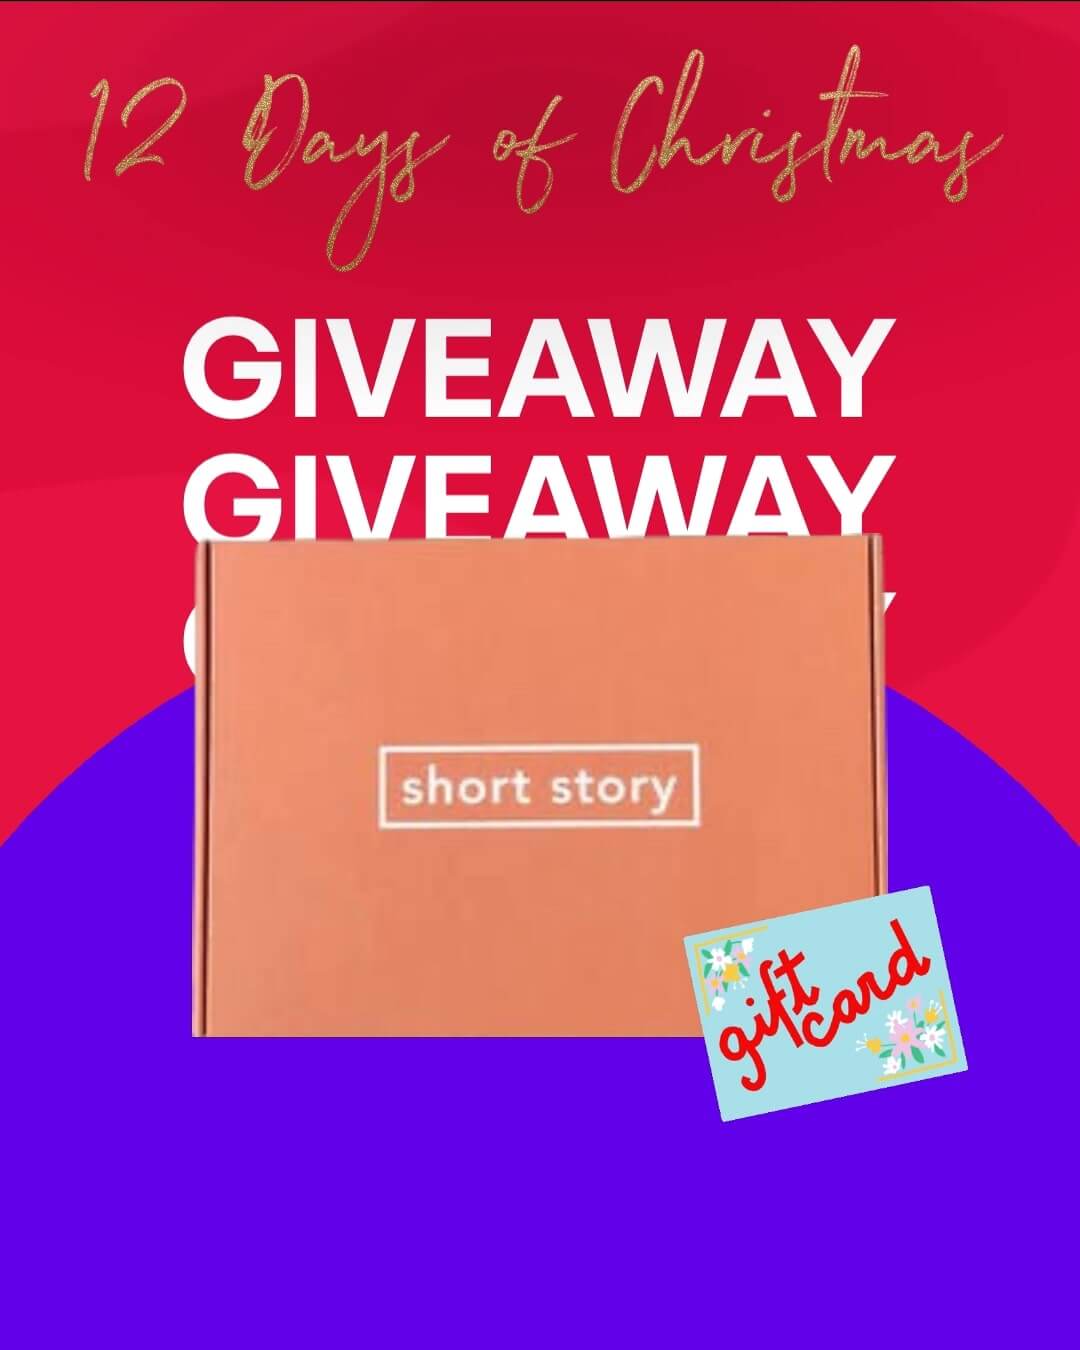 What you can win: a $50 gift card to Short Story!